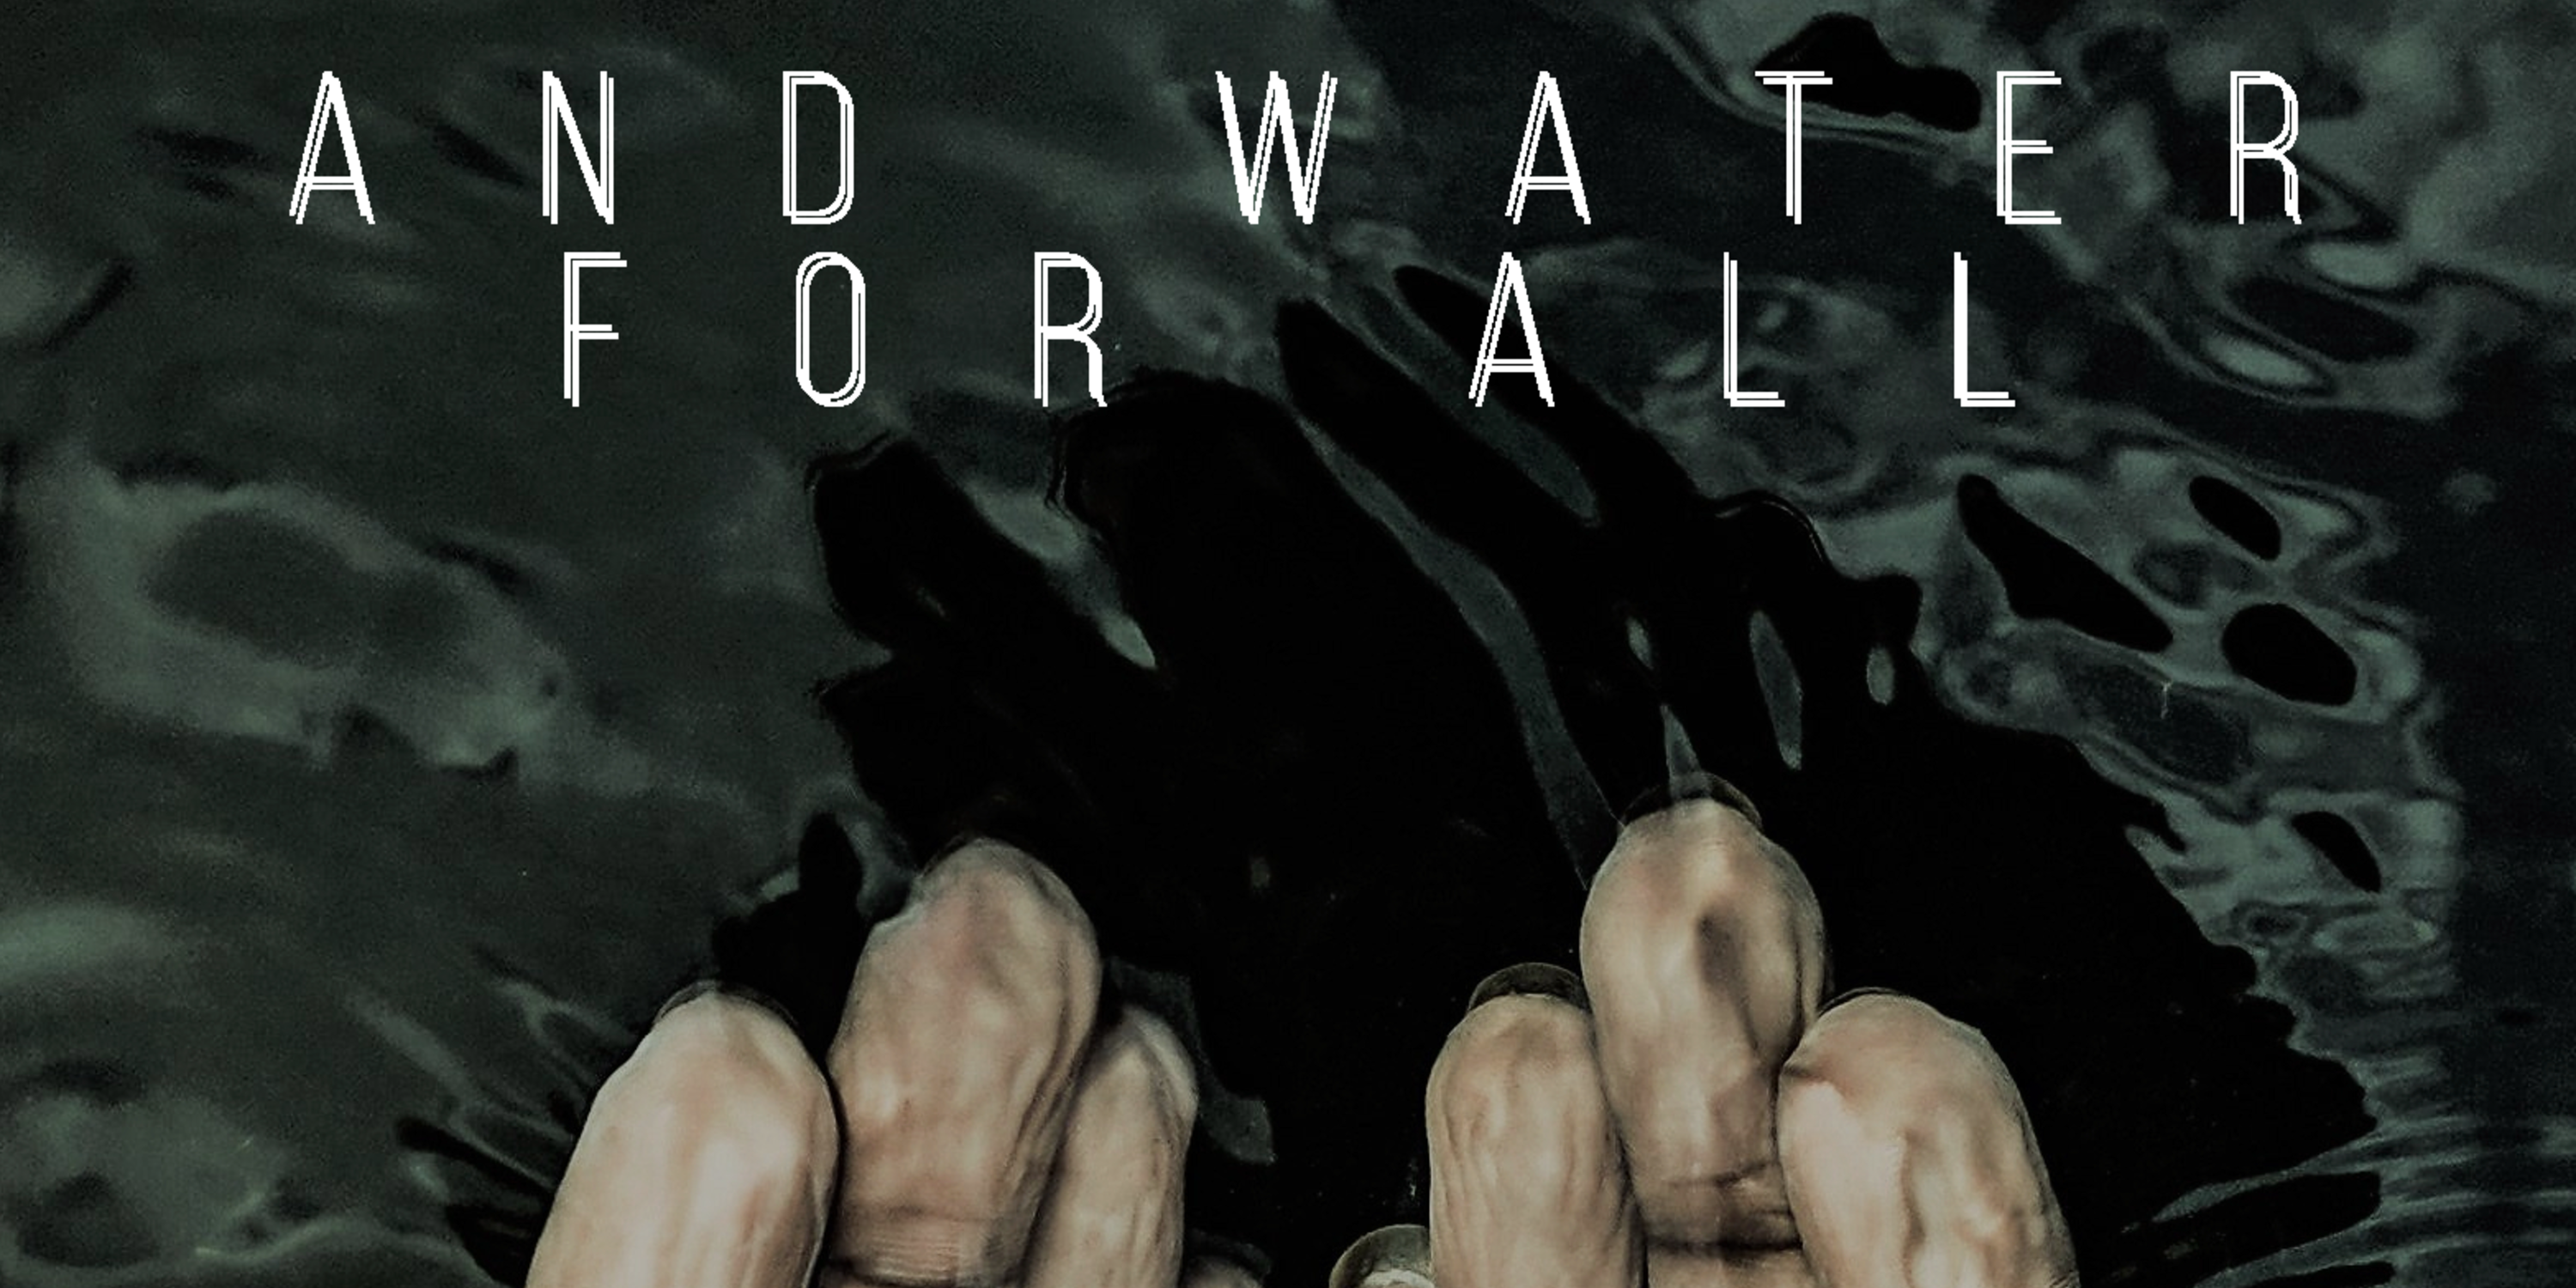 And Water for All - stylized image of hands with water behind them